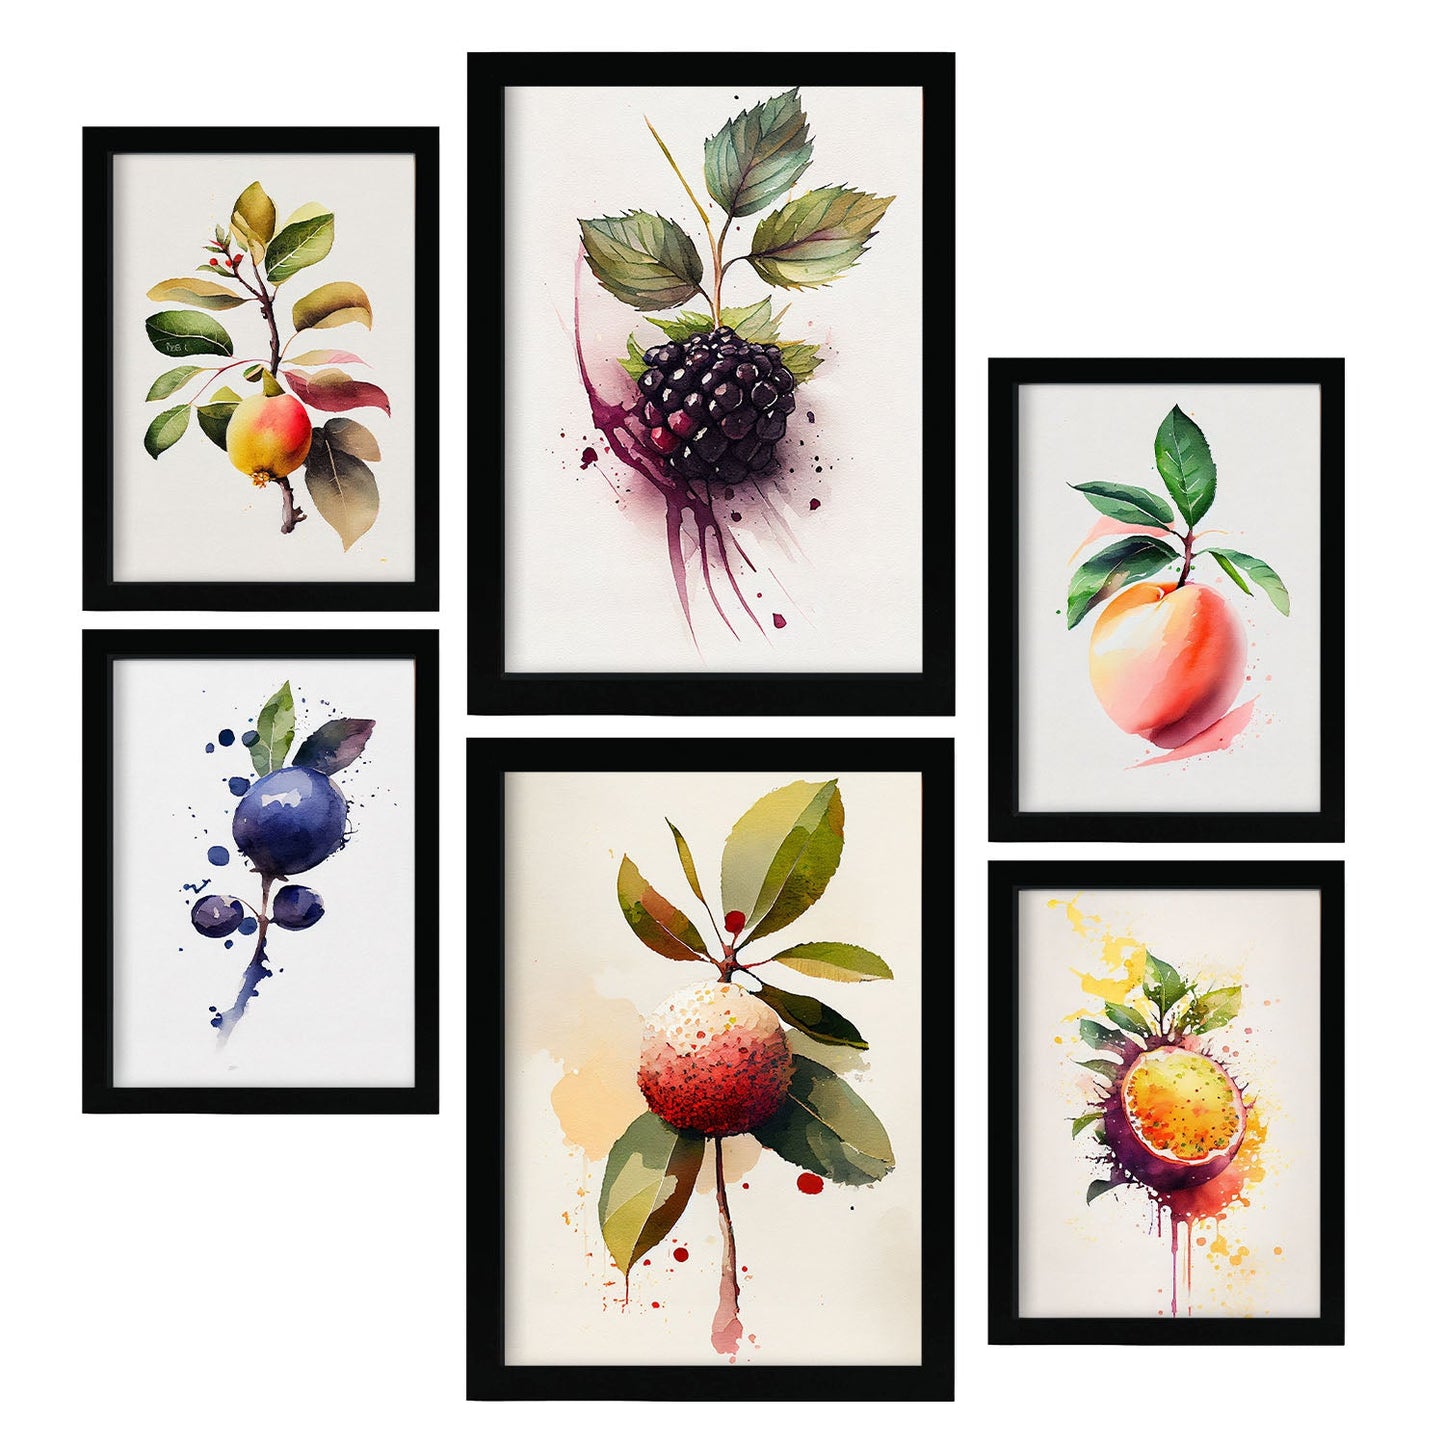 Nacnic Watercolor Fruits Set_09. Aesthetic Wall Art Prints for Bedroom or Living Room Design.